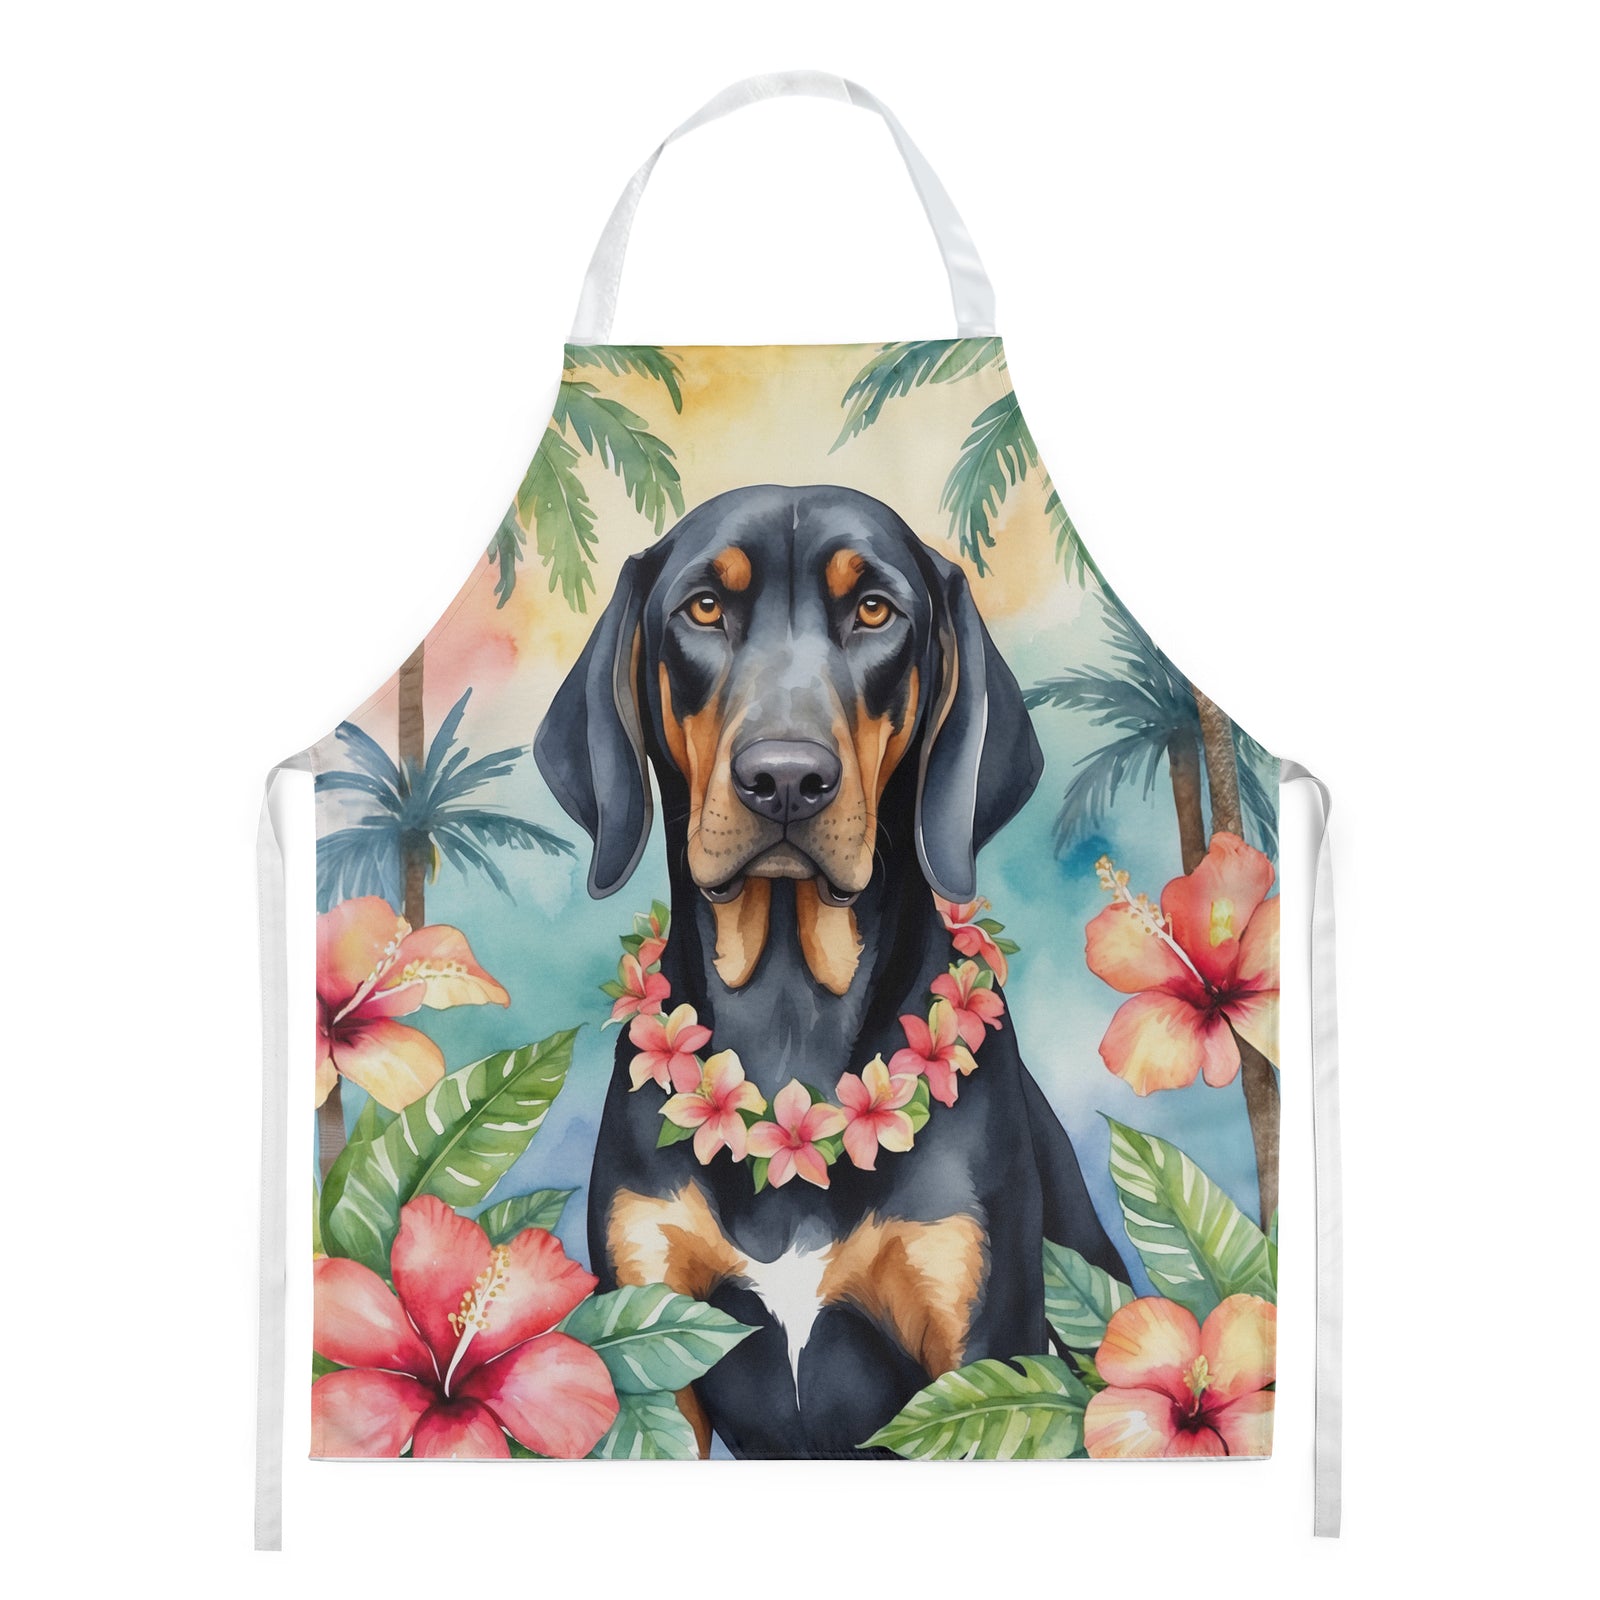 Buy this Black and Tan Coonhound Luau Apron